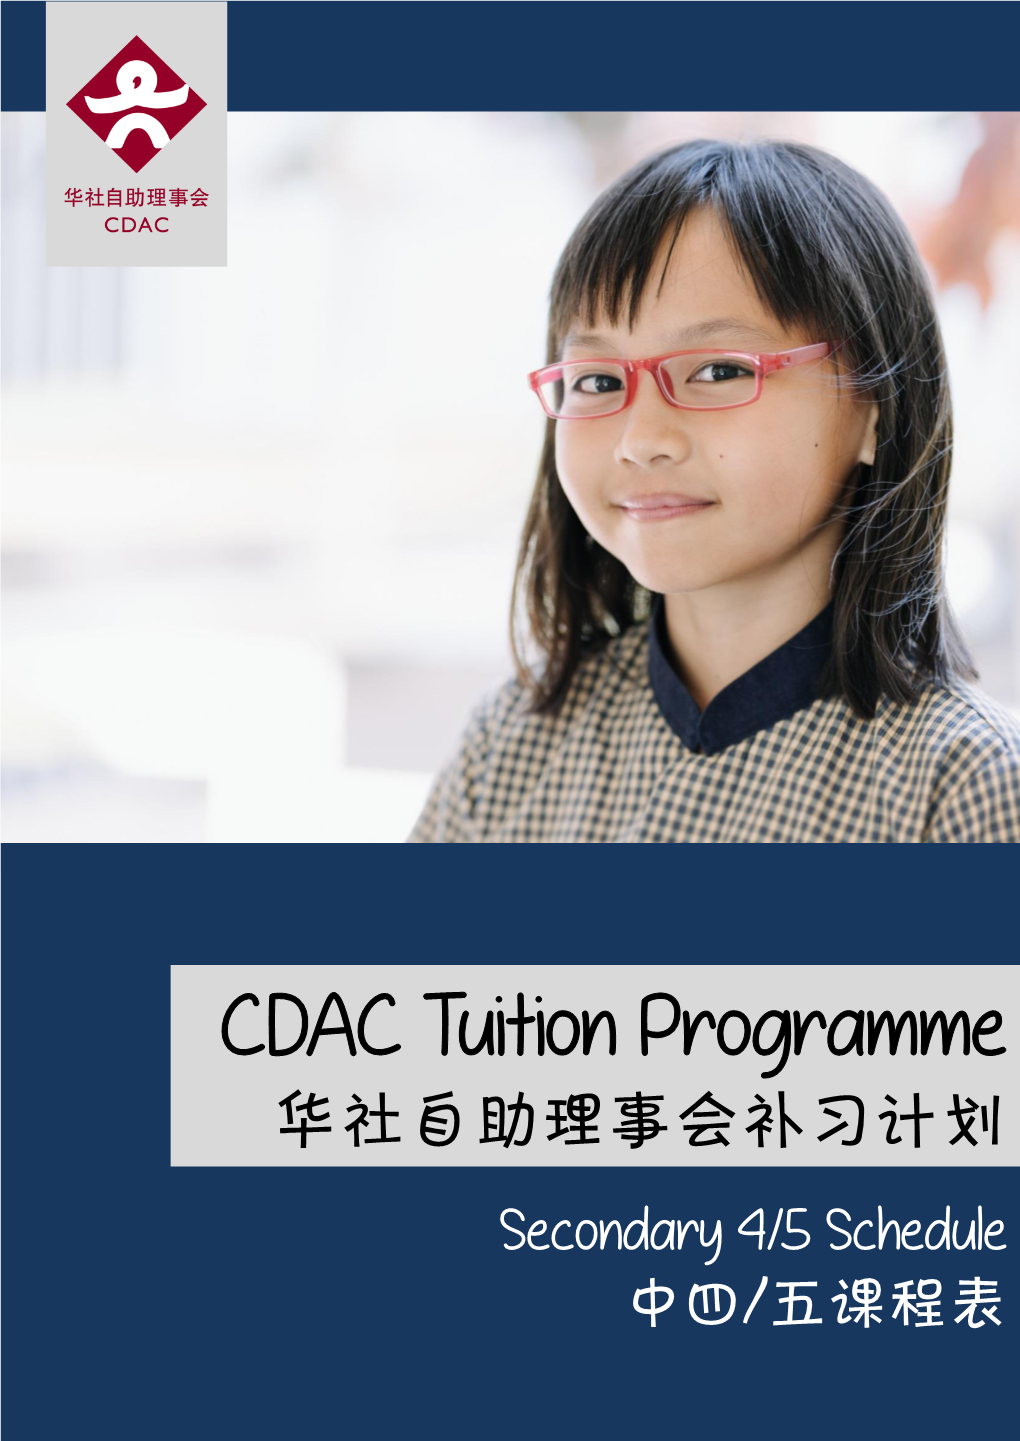 CDAC Tuition Programme 华社自助理事会补习计划 Secondary 4/5 Schedule 中四/五课程表 List of Centres & Addresses